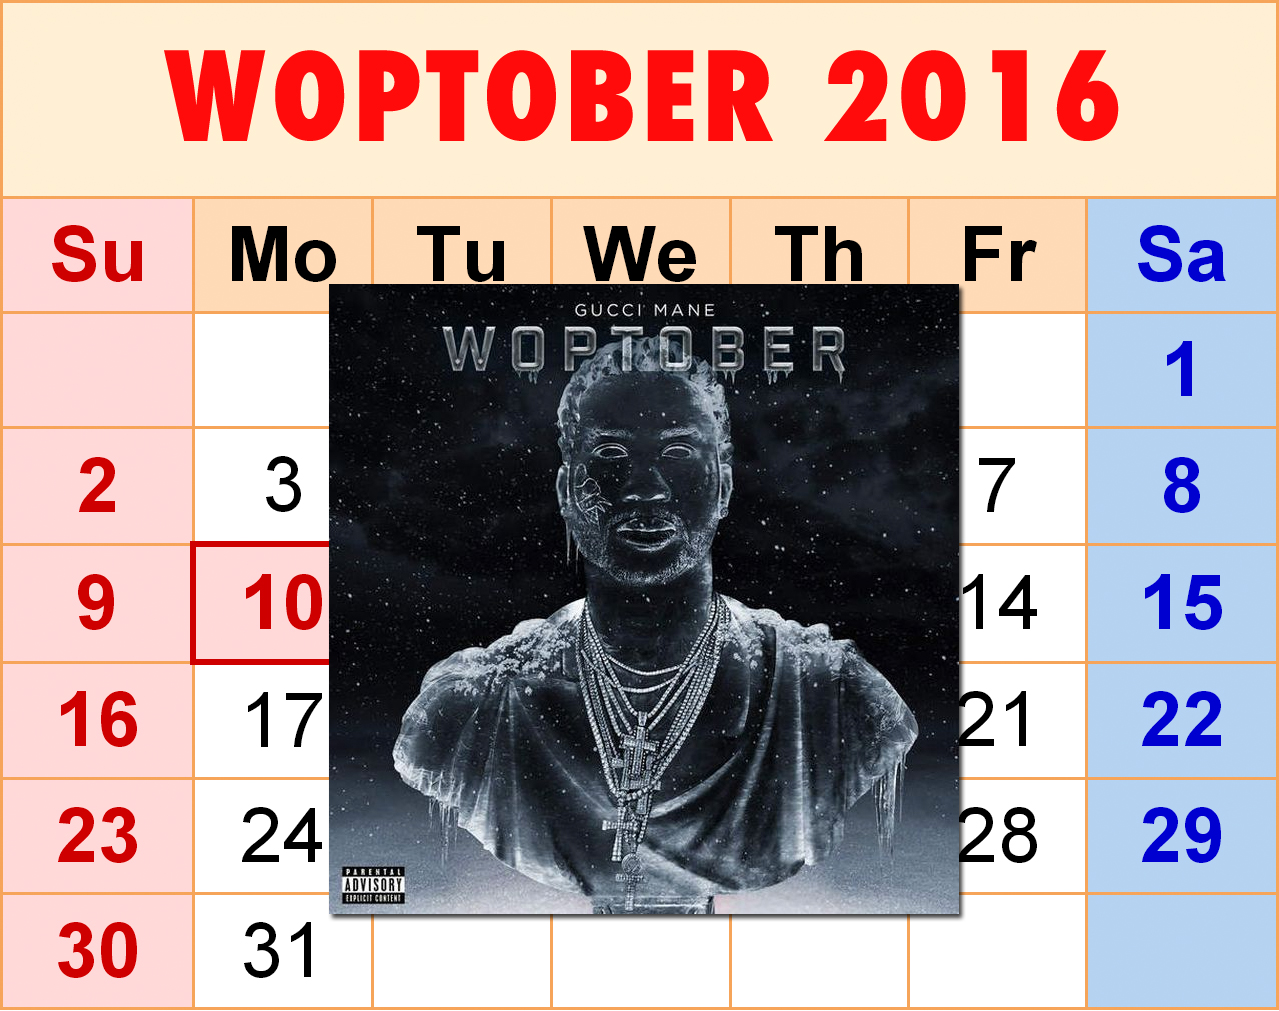 Gucci Mane's Dropping 'Woptober' In October Plus He's Got A New Single 'Bling Blaww Burr'